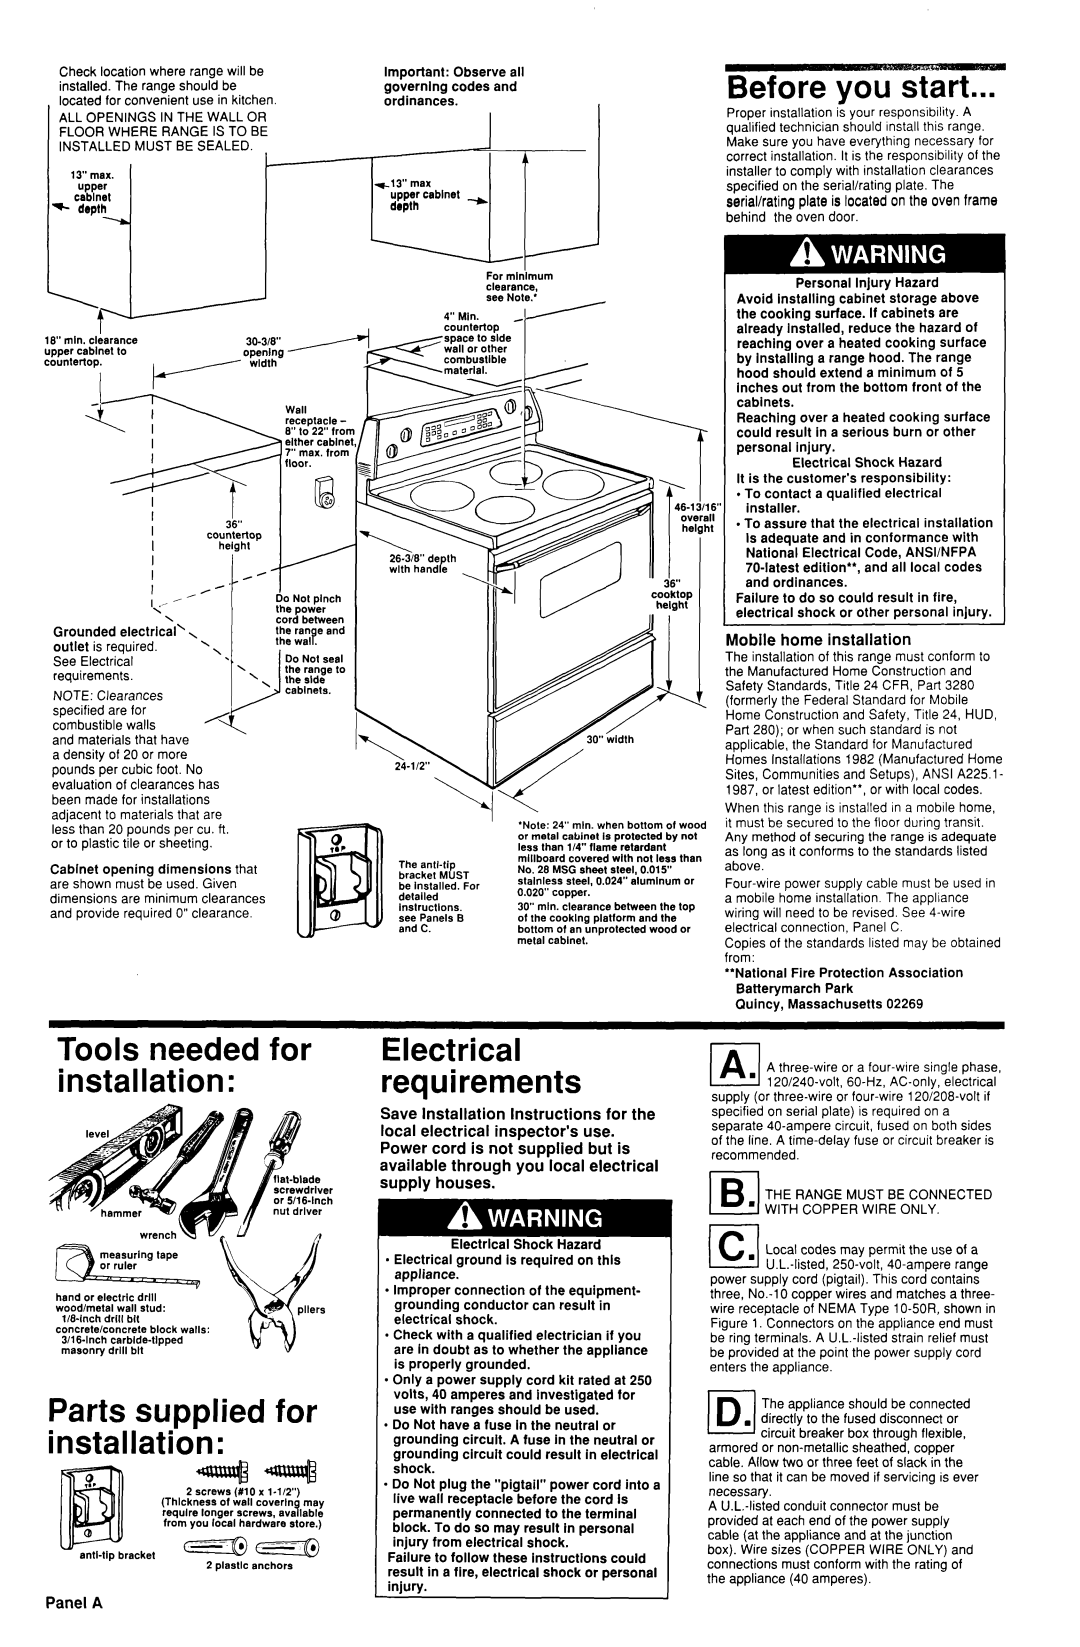 KitchenAid 9750520 REV A Before you start, Tools needed for installation, Parts supplied for installation, Panel A 